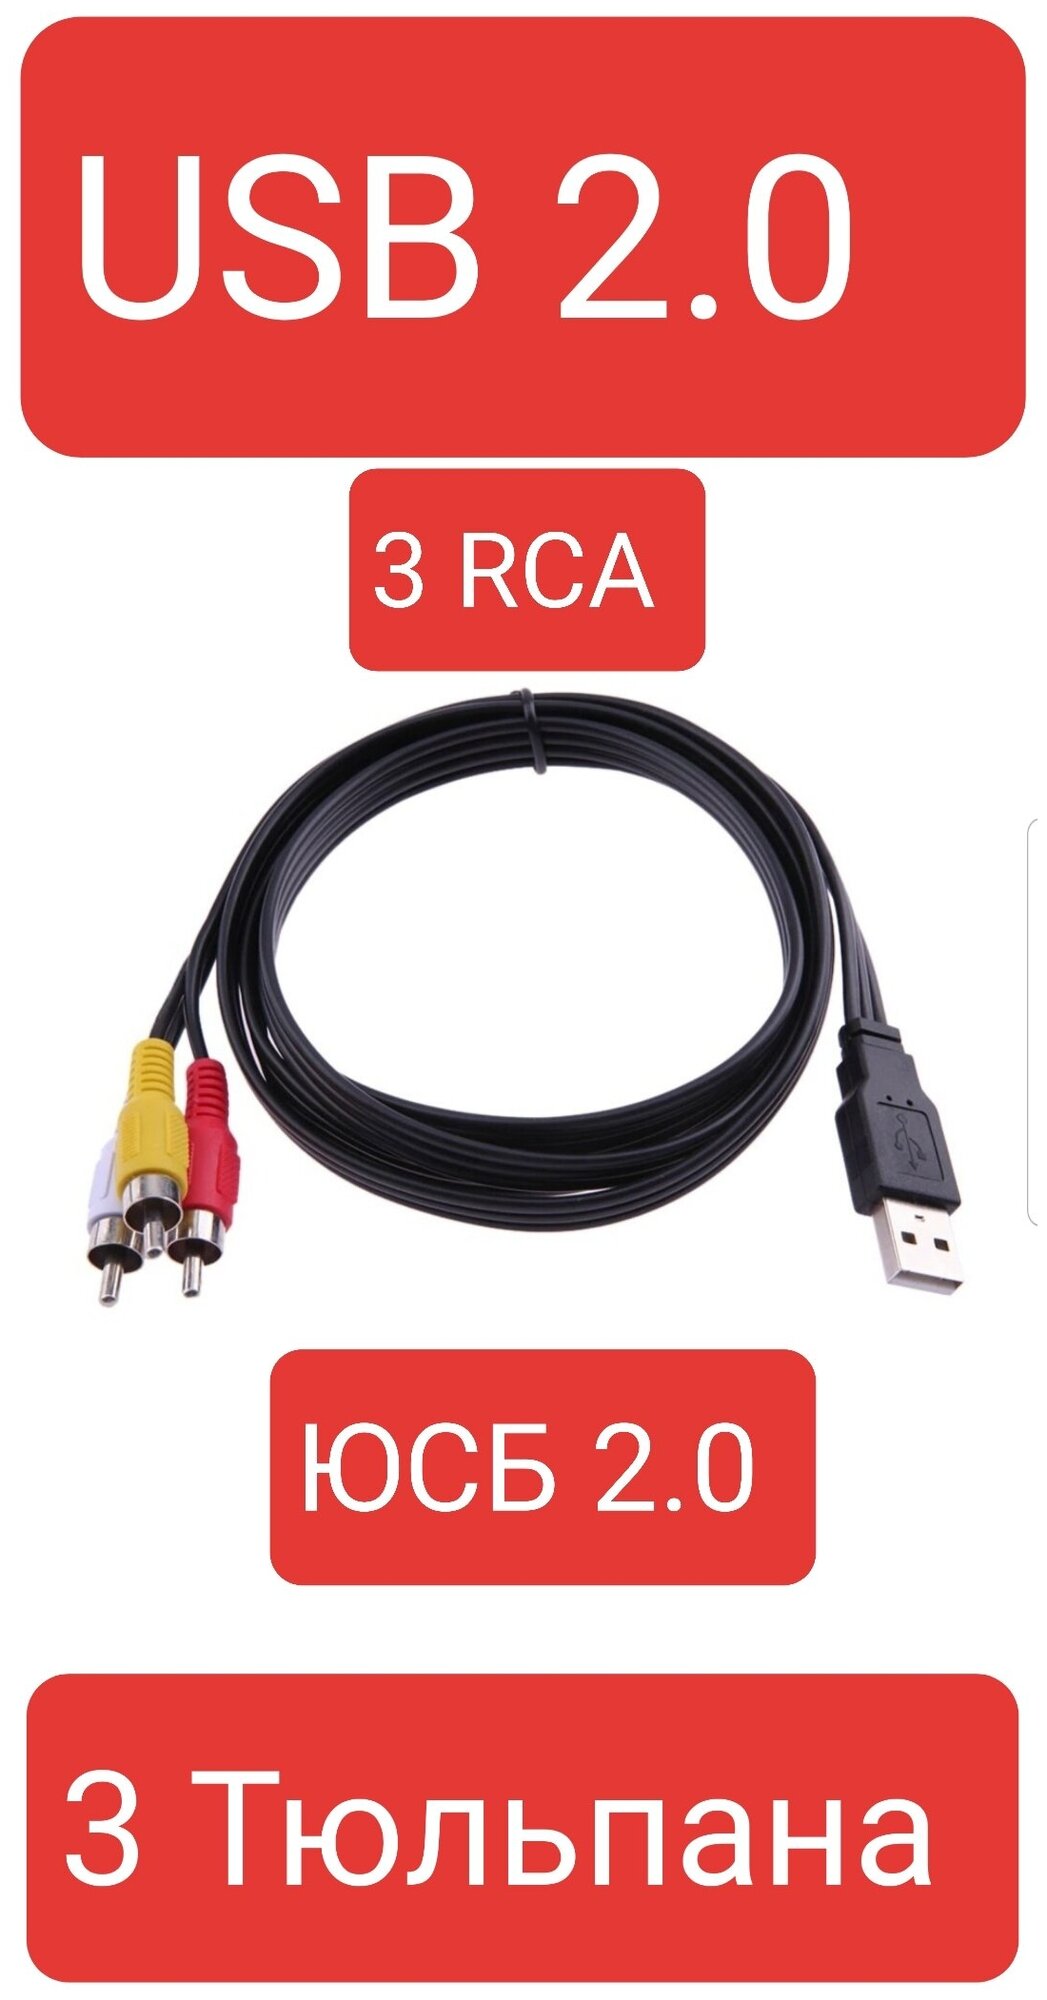 USB 2.0 to 3 RCA